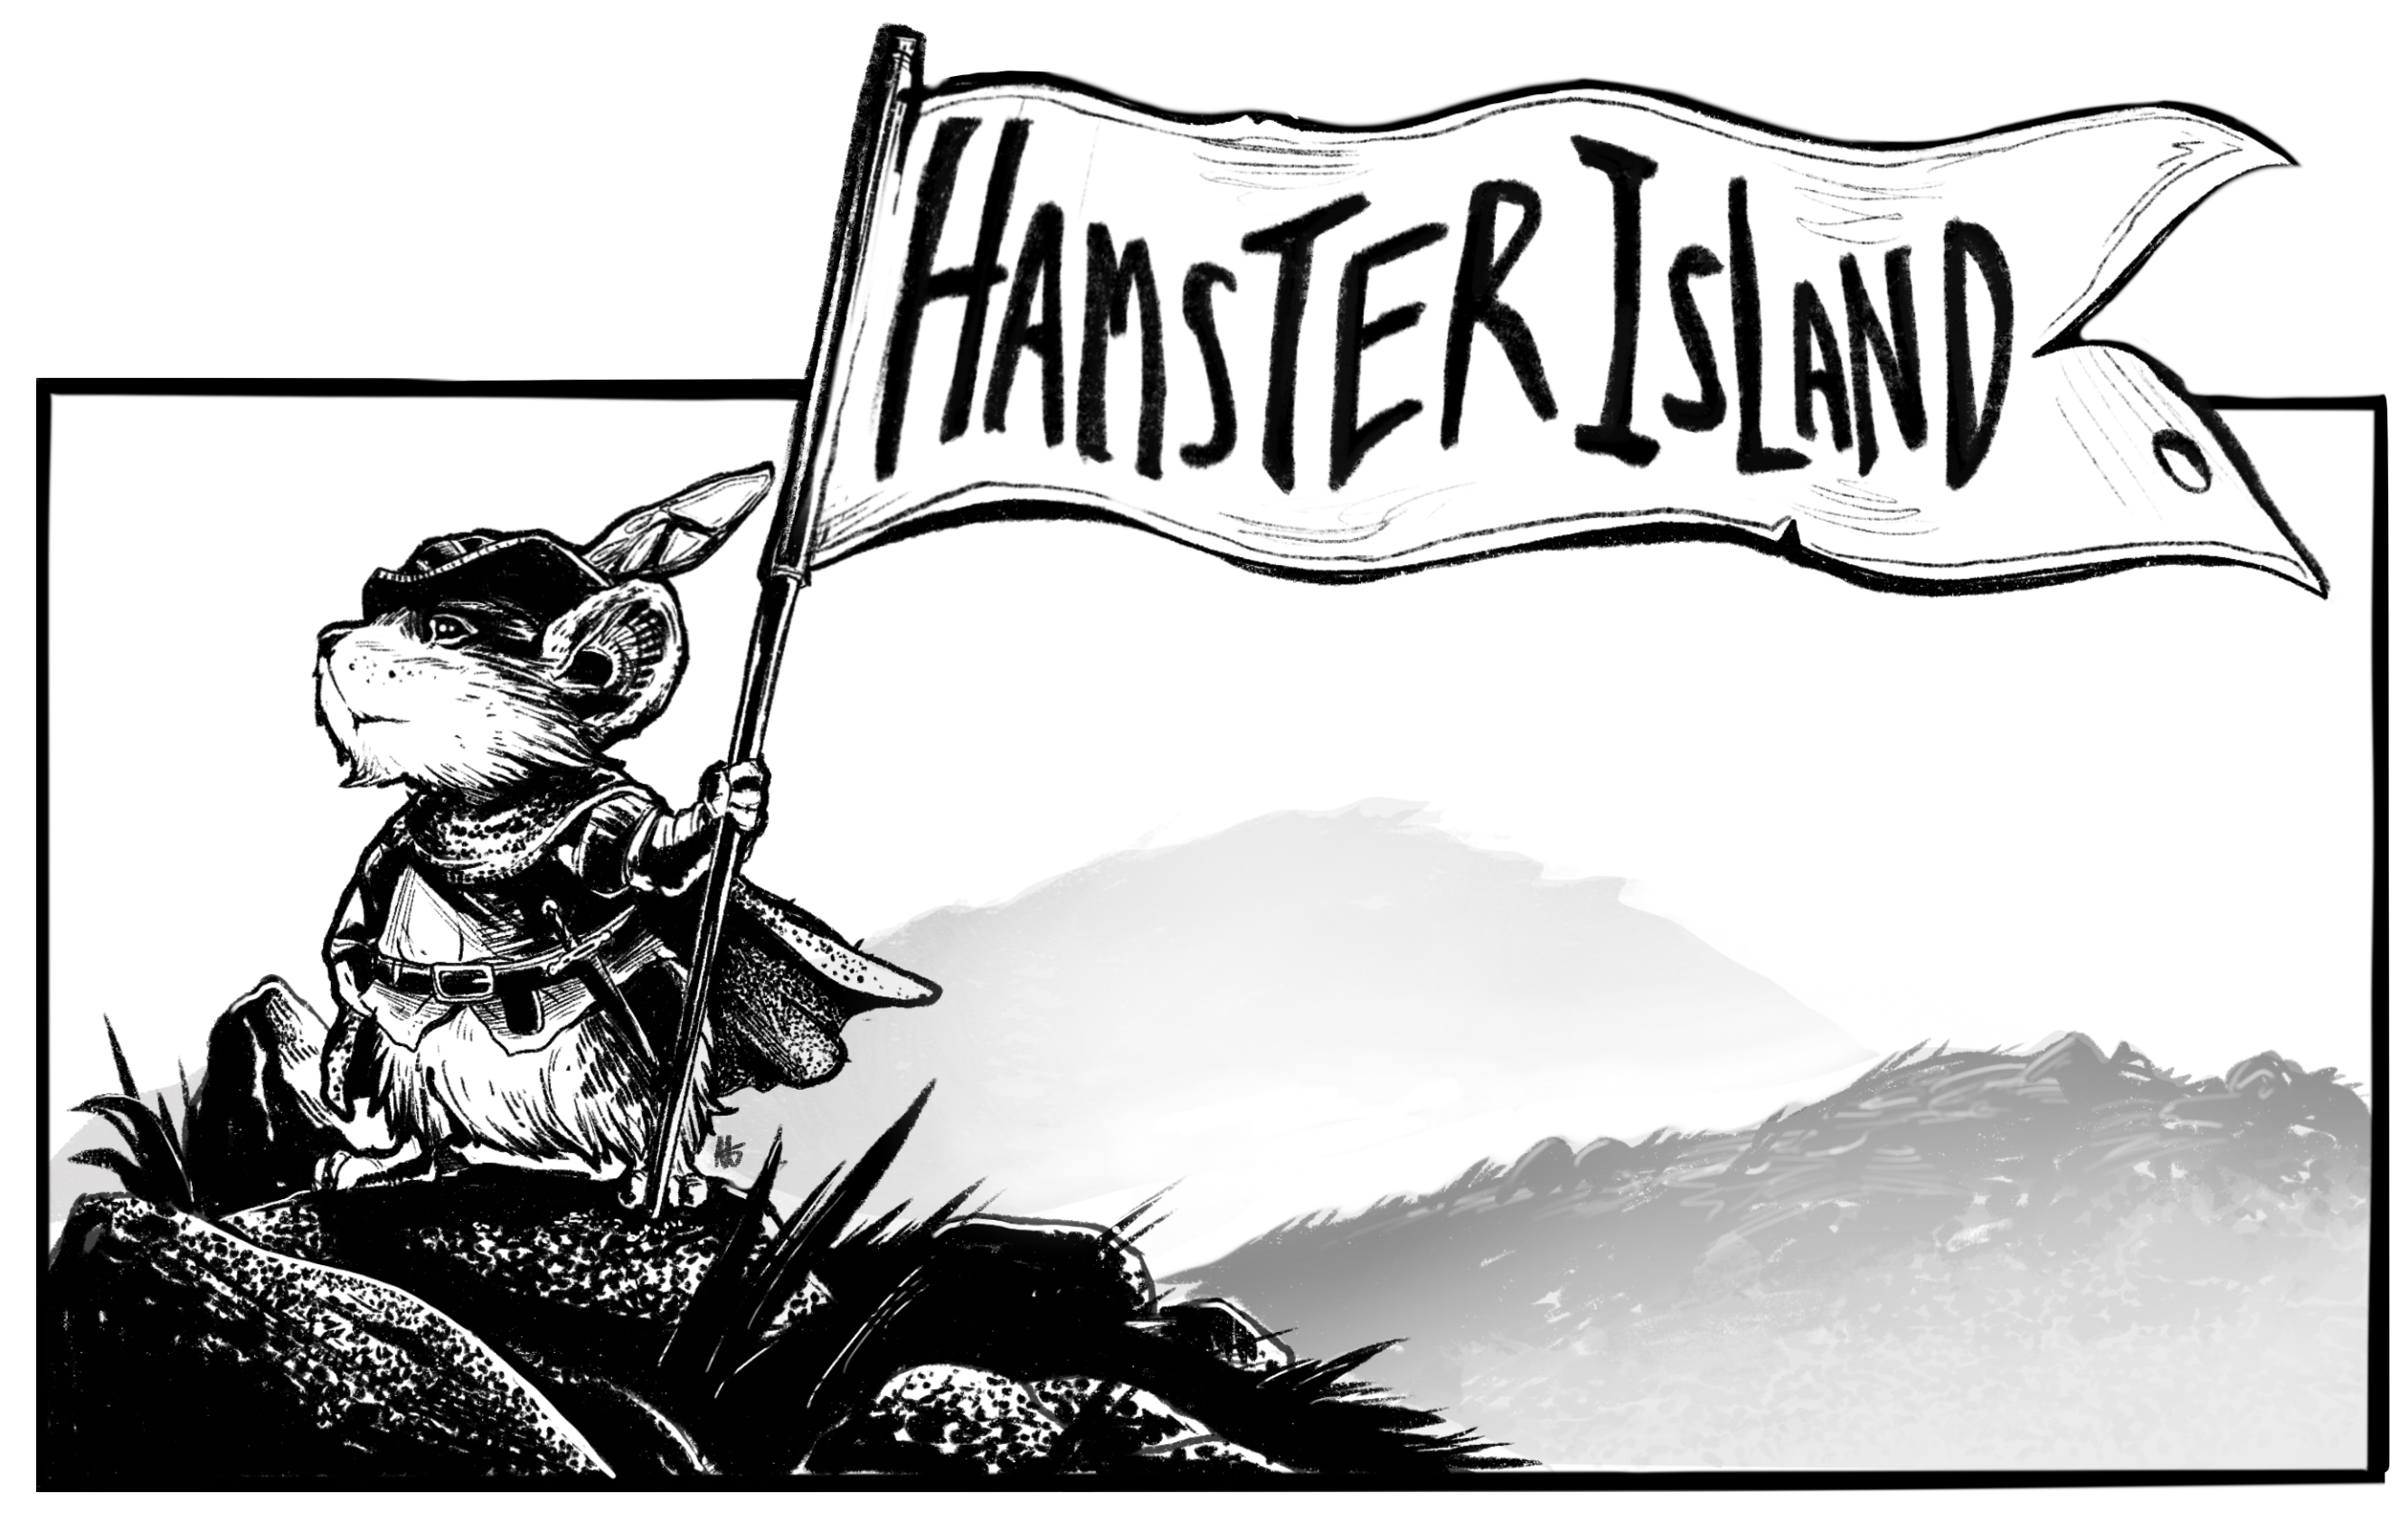 Hamster Island Productions